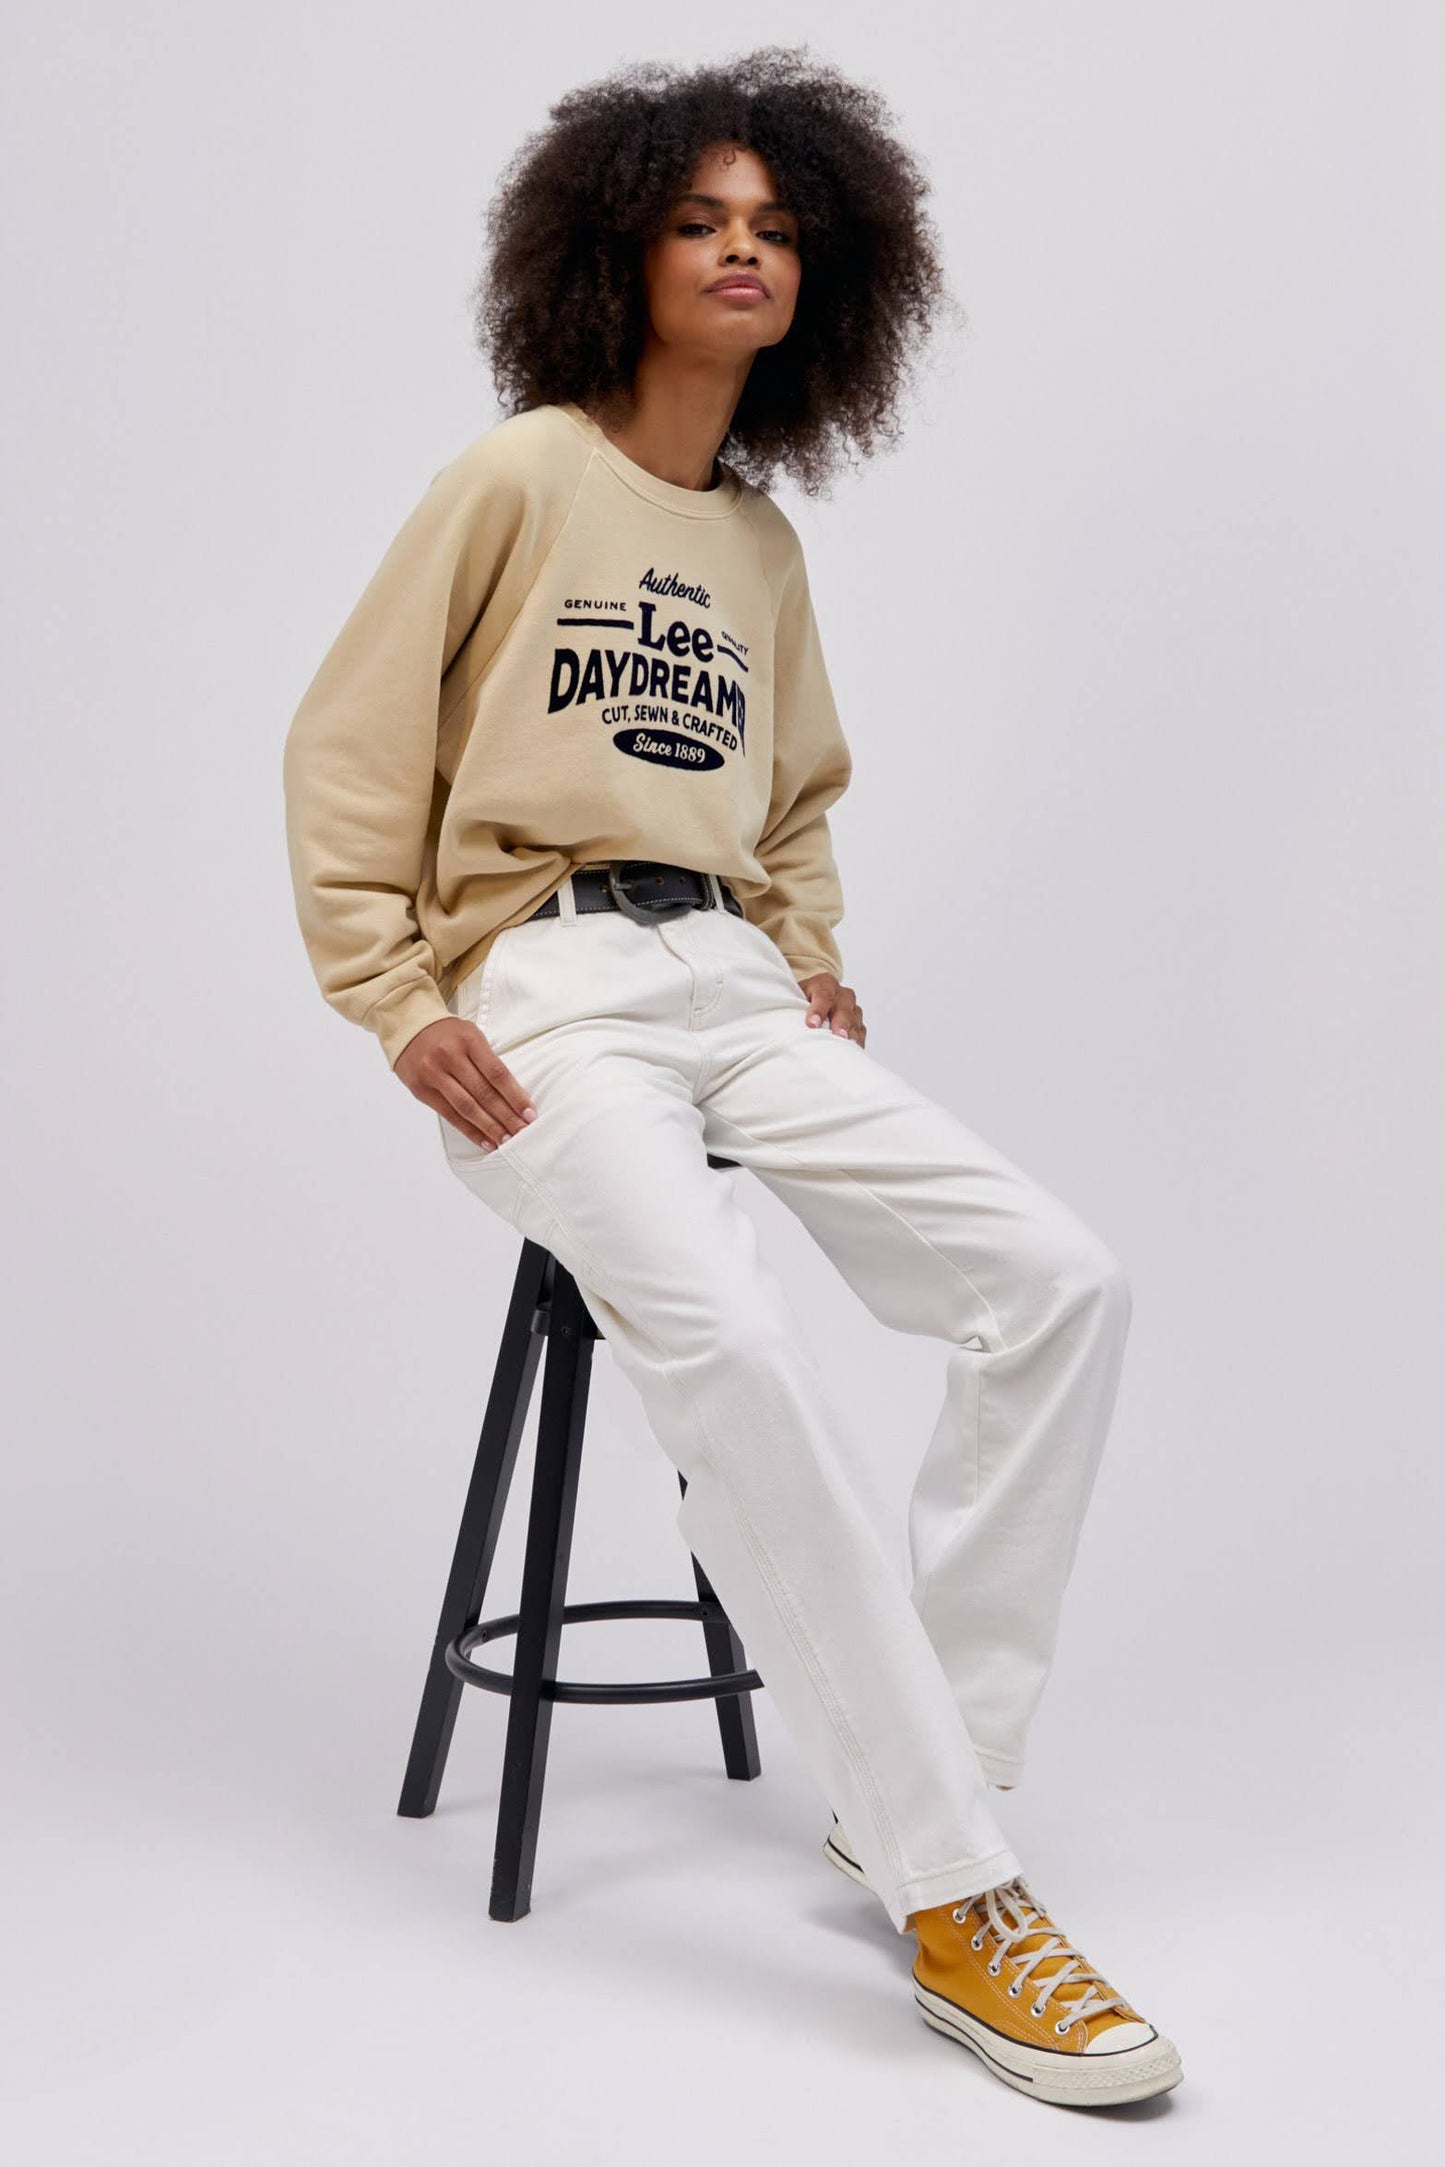 curly haired model sitting on stool wearing khaki colored sweatshirt and white workwear pants